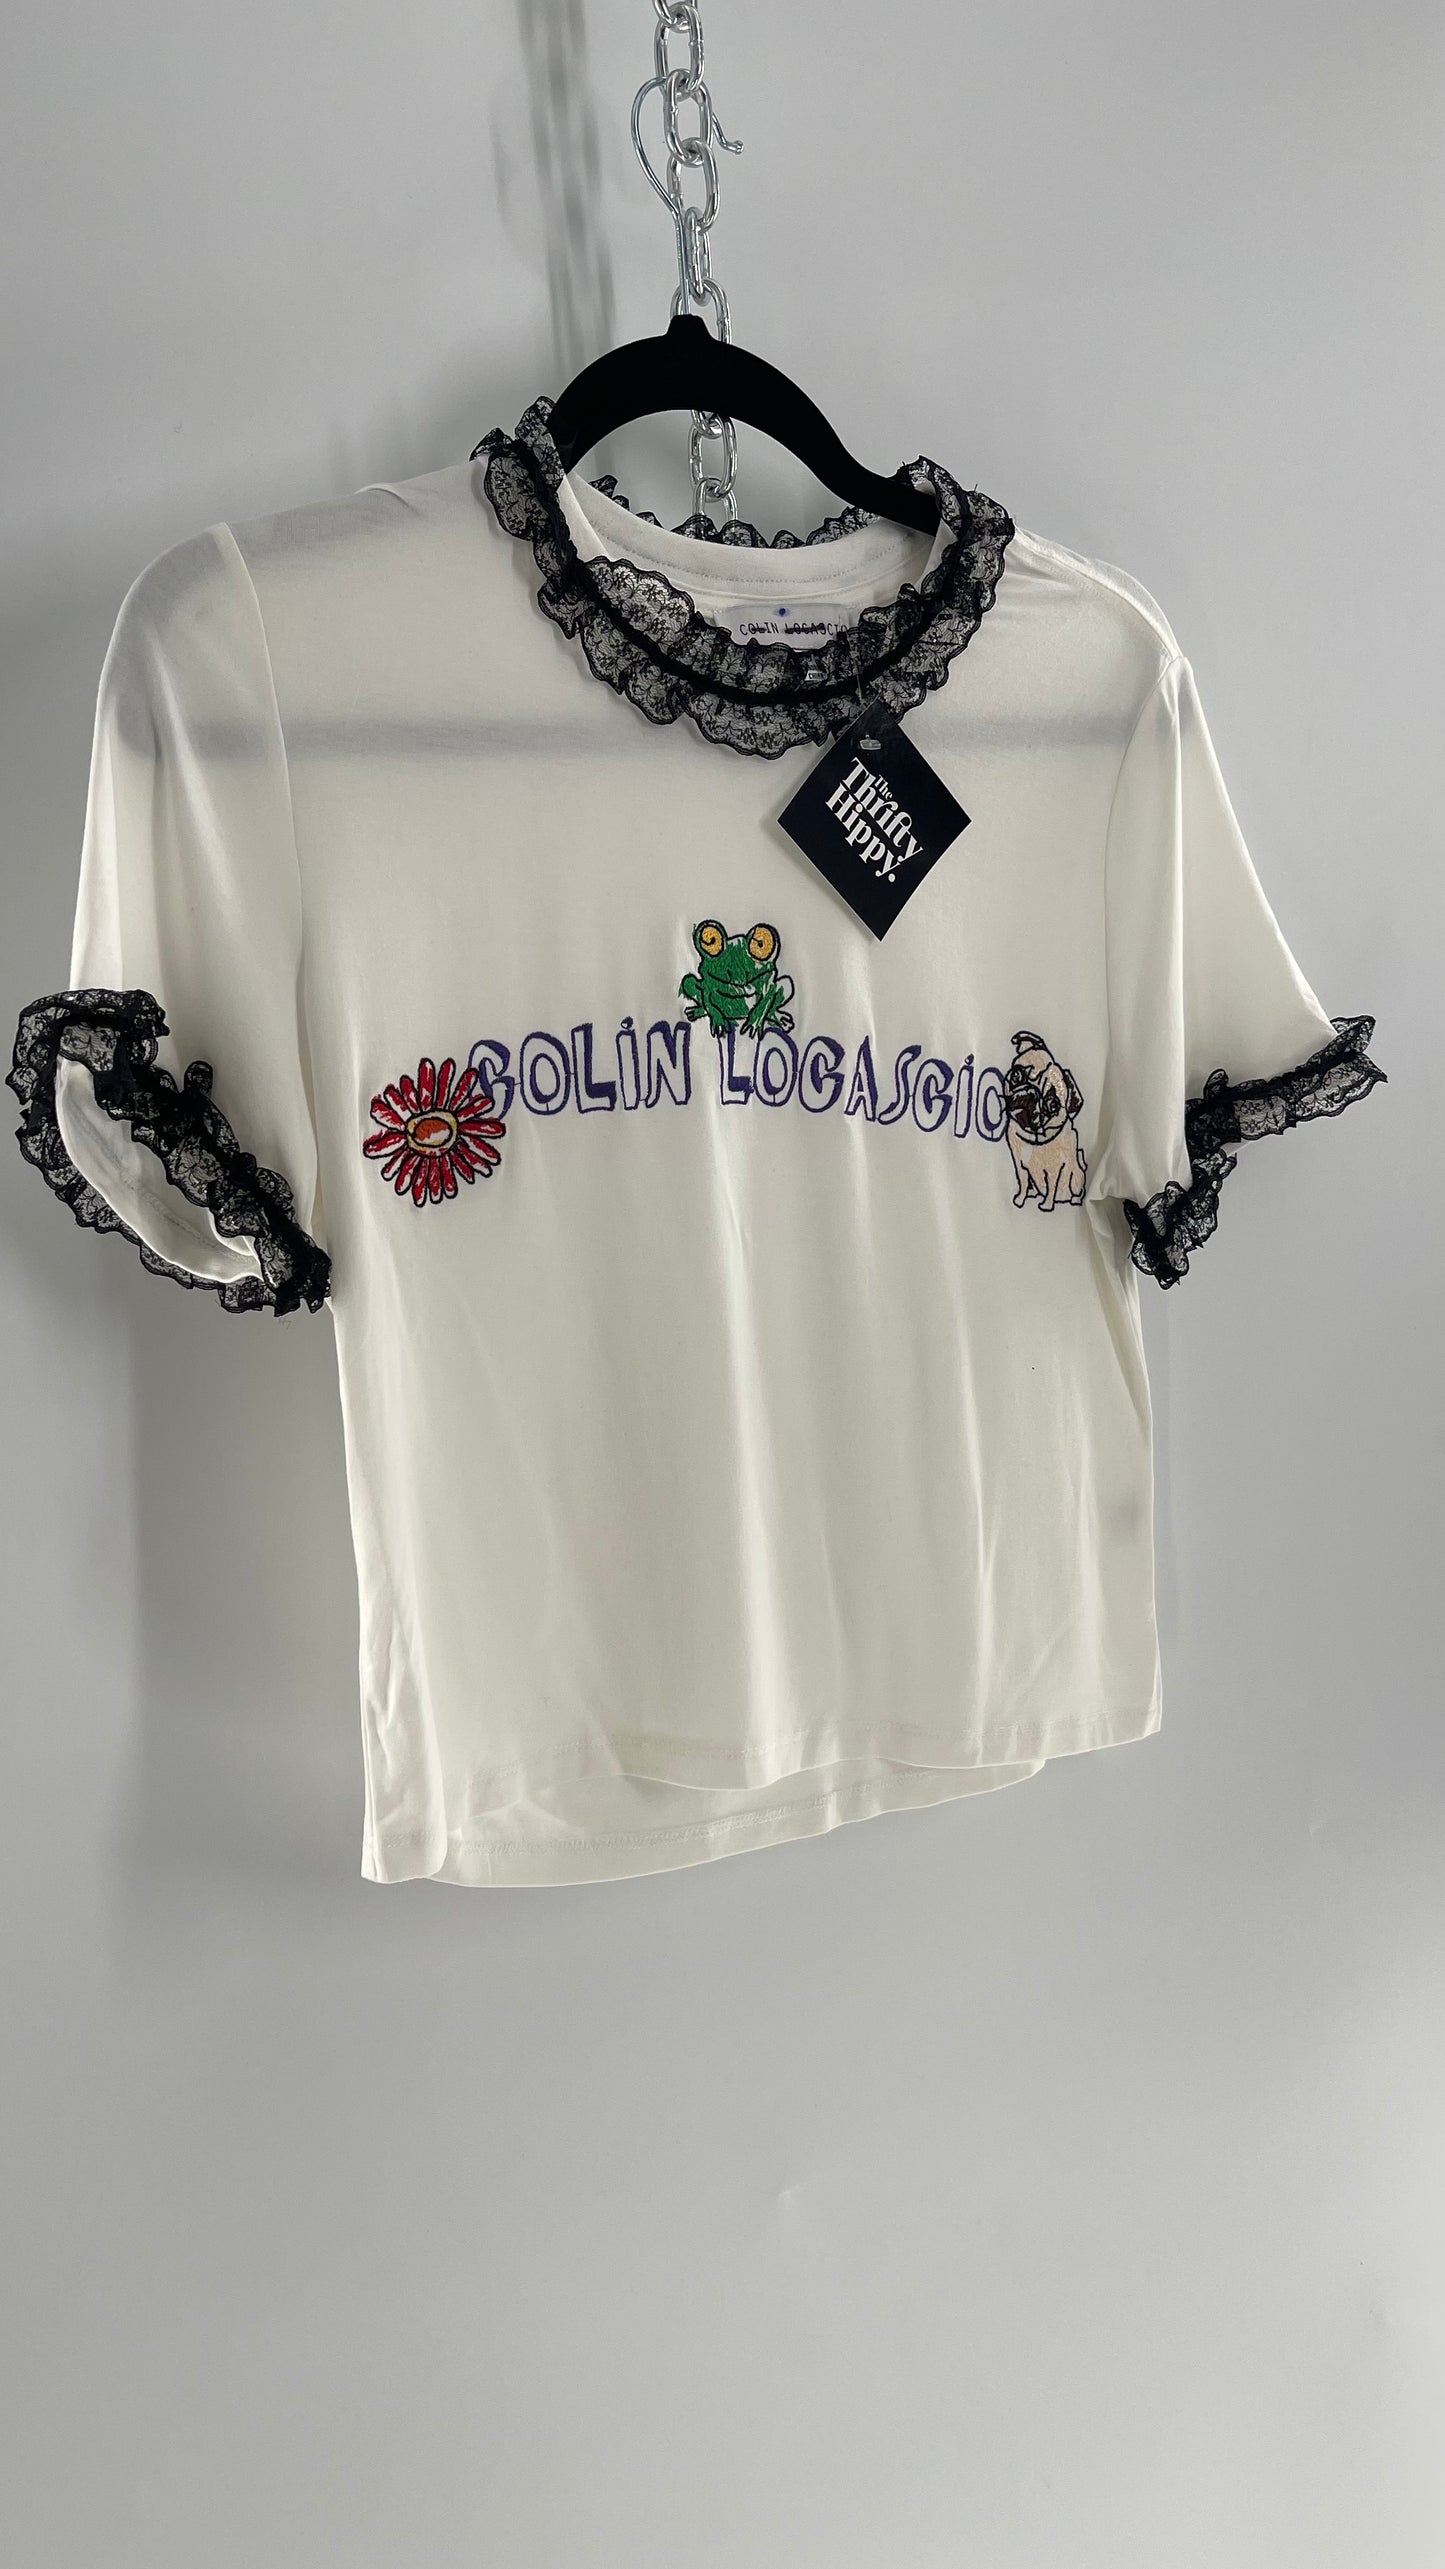 Colin Locascio Tannie T Shirt White Black Lace Ruffle Sleeves Frog Embroidery  (Small)